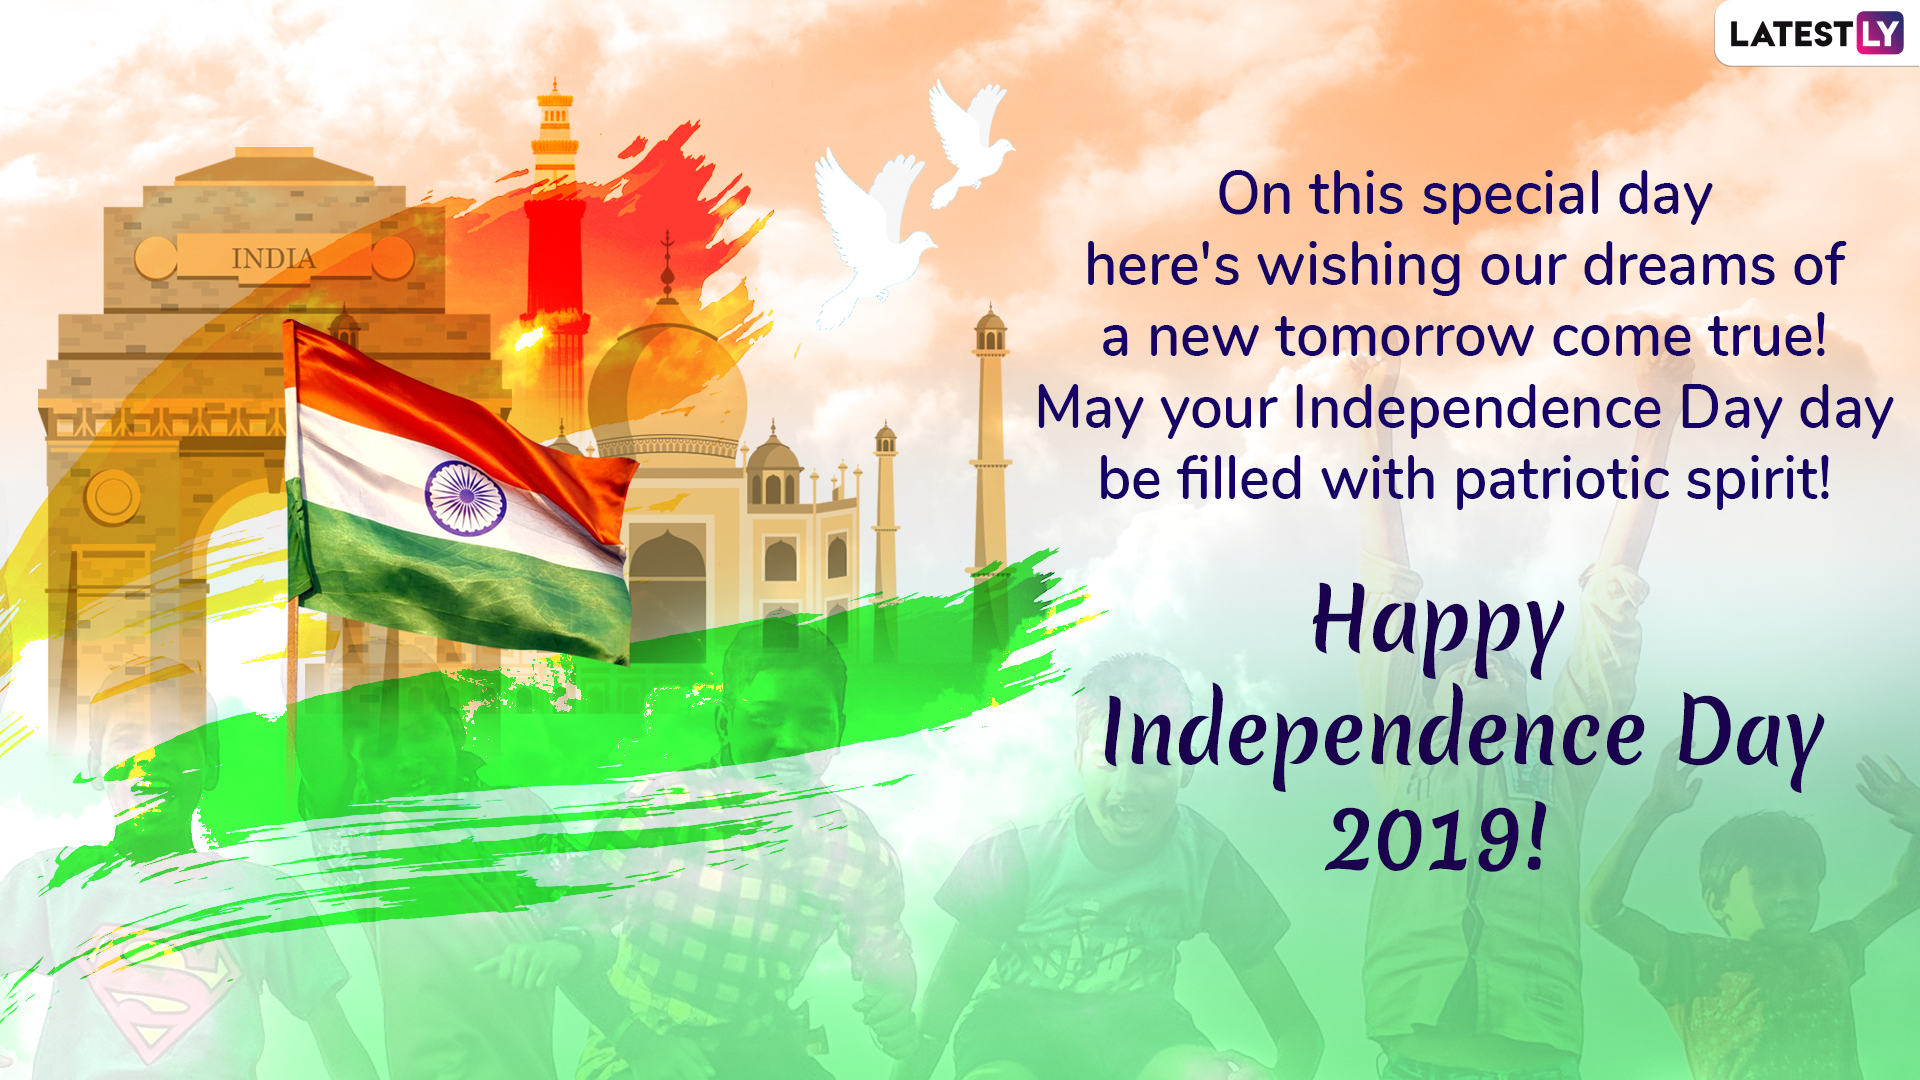 Happy Indian Independence Day 2019 Wishes: WhatsApp Stickers ...